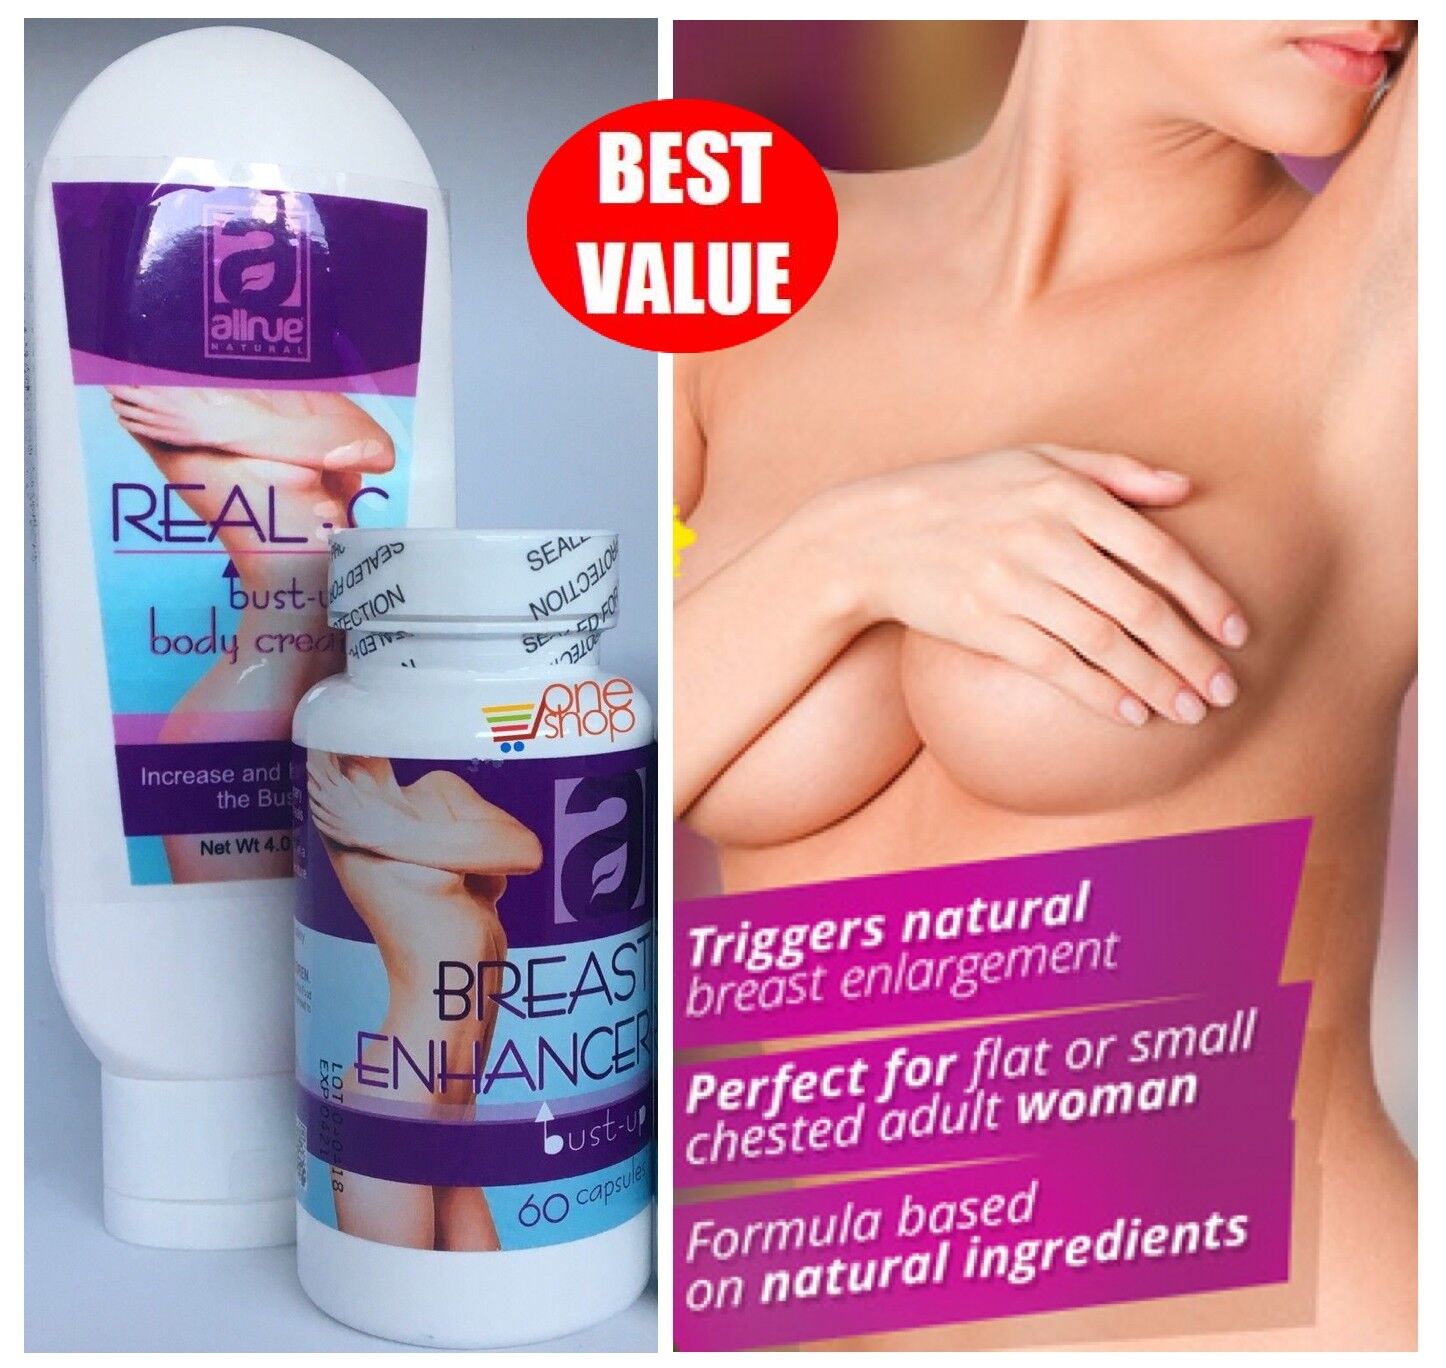 Real C Breast Growth Enhancer Firm Cream Bust Enlargement Pills Firming Capsules AllNue Bust Up